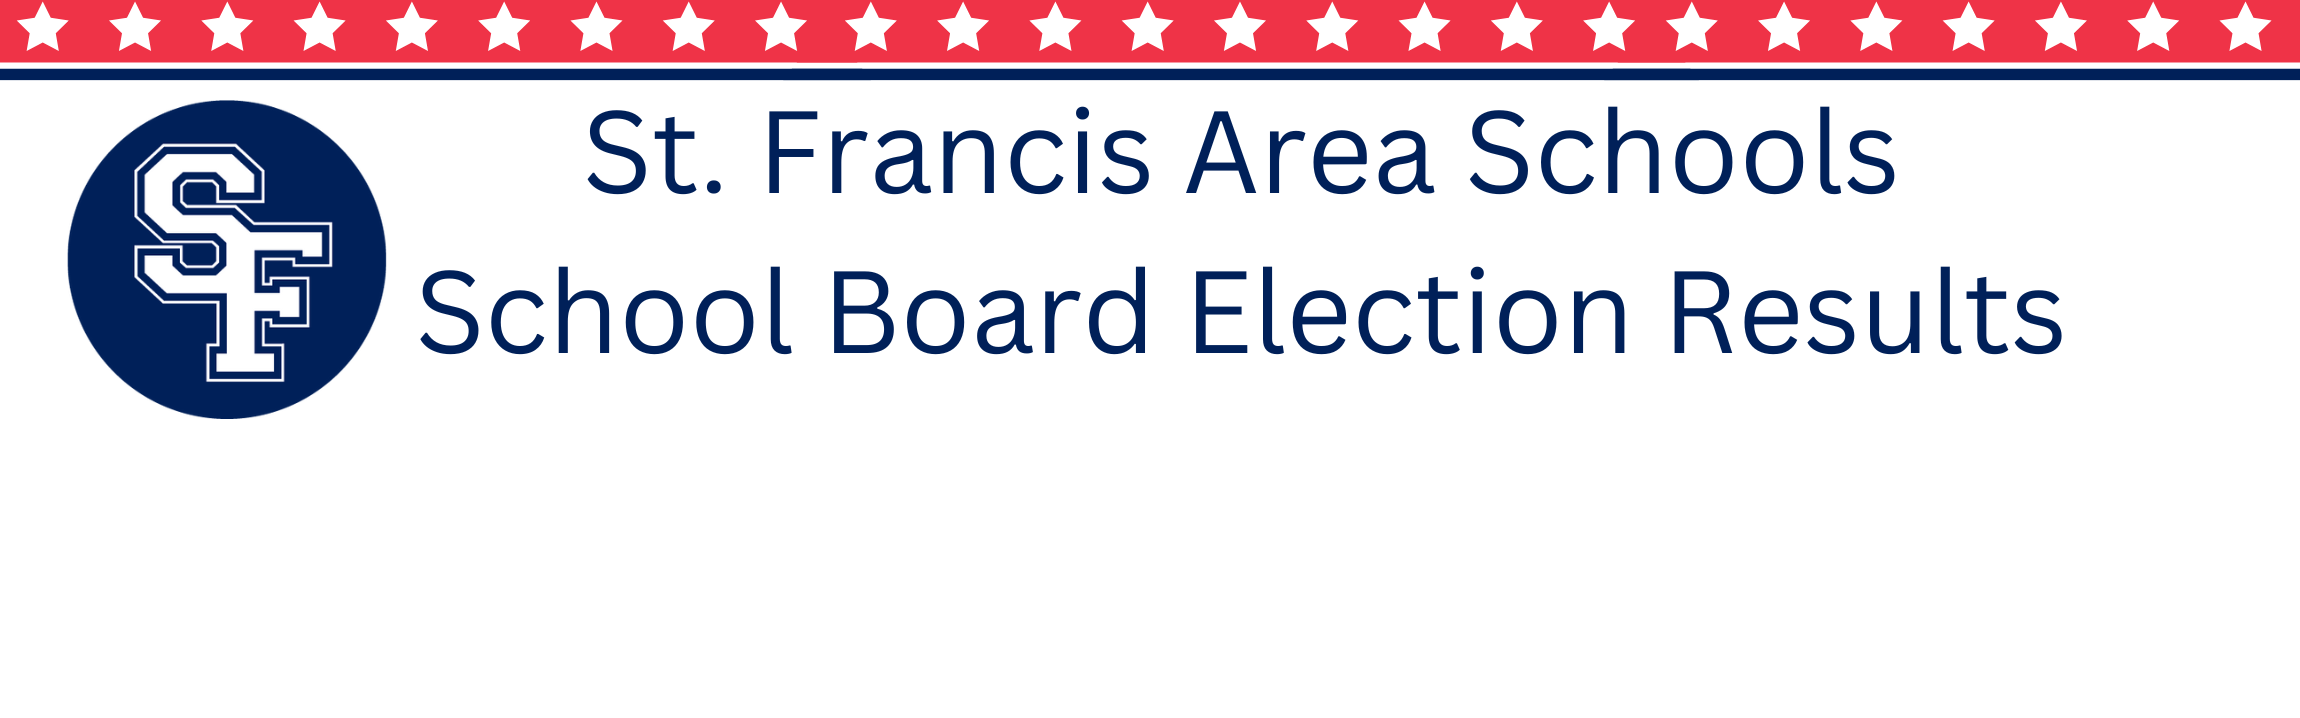 Graphic for the school board election